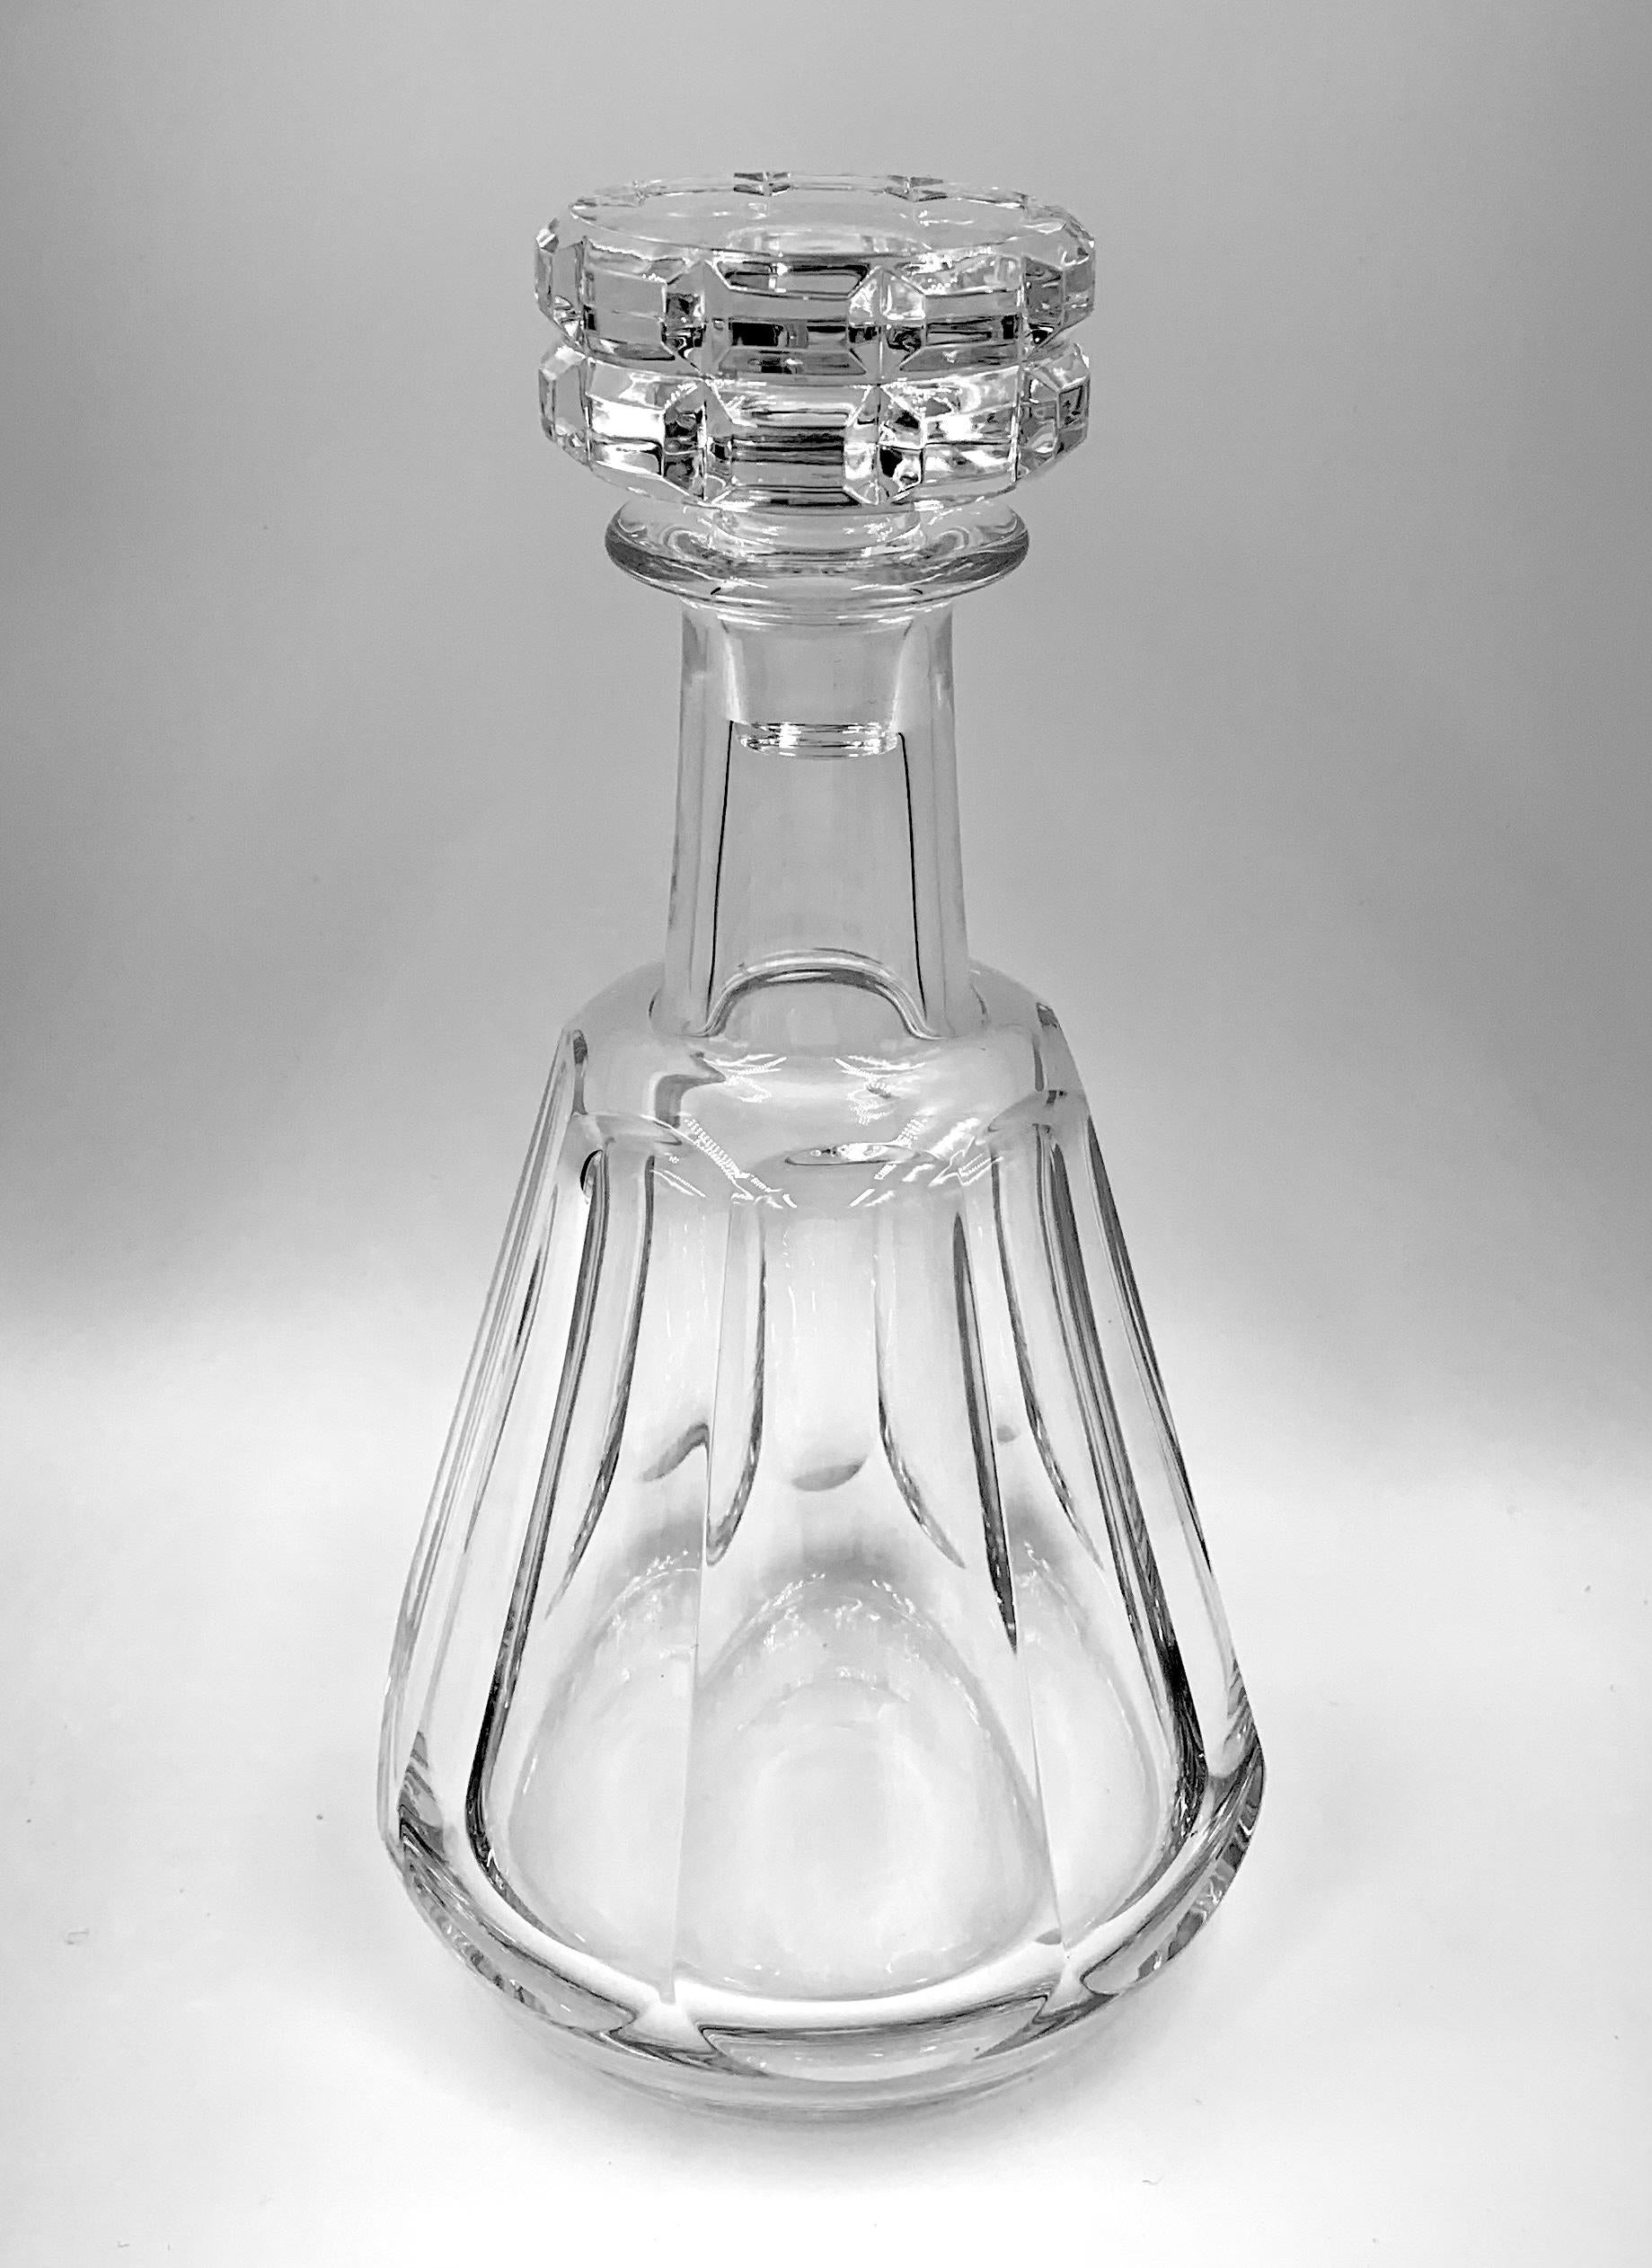 French Baccarat Harcourt Talleyrand Decanter, 20th Century